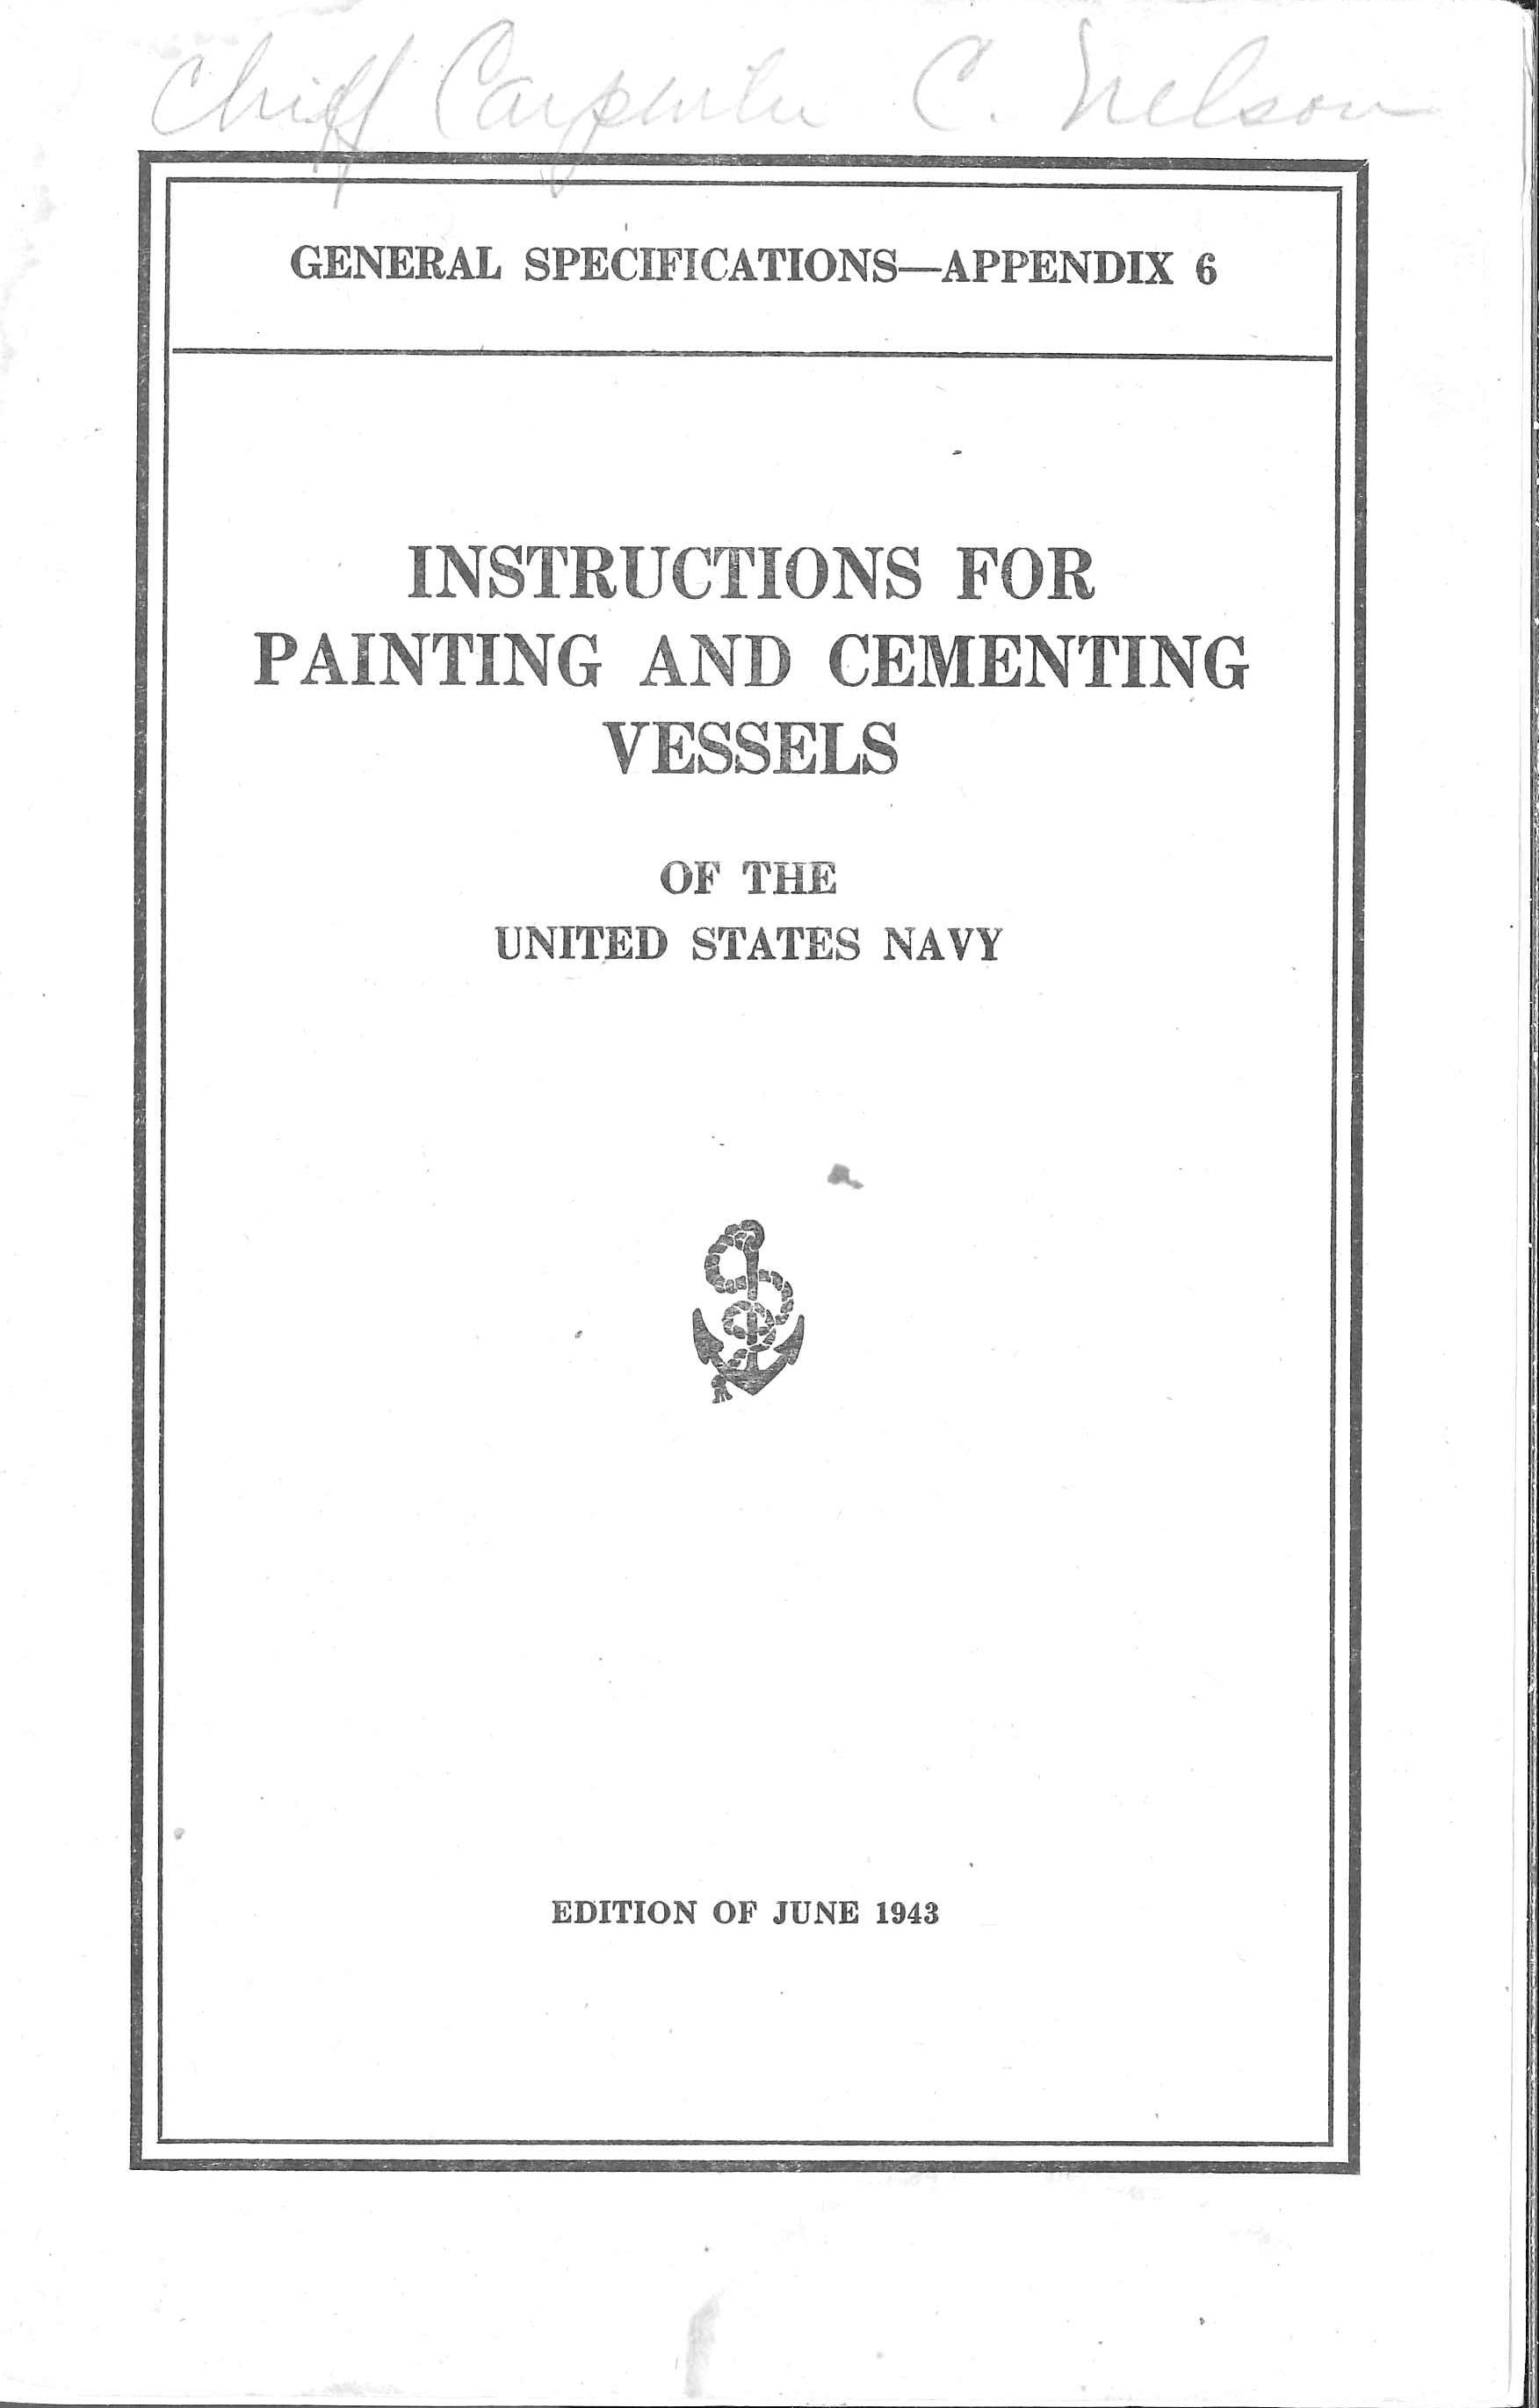 https://www.history.navy.mil/content/dam/nhhc/research/library/online-reading-room/ships/instructionsforpaintingandcementingvesselsoftheunitedstatesnavy/cover-instructions-for-painting-and-cementing-vessels.jpg